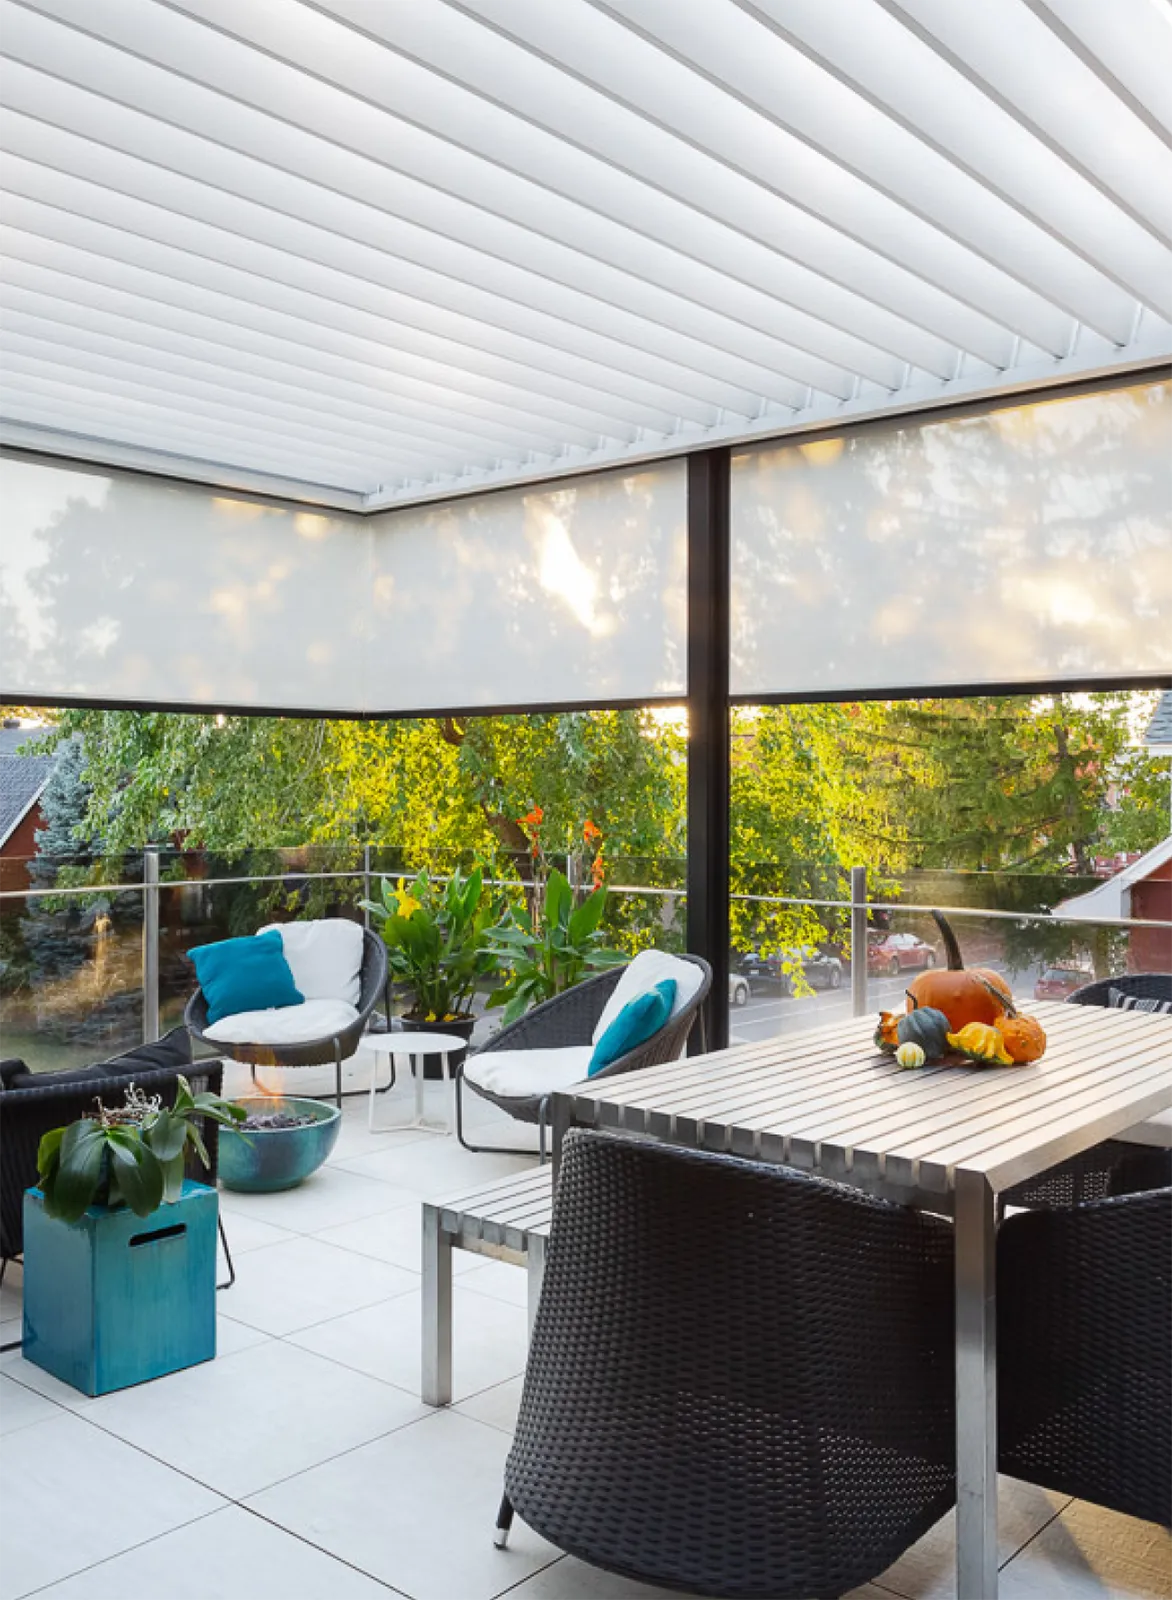 Find out more about Renson's Fixscreen Minimal external blinds product range.